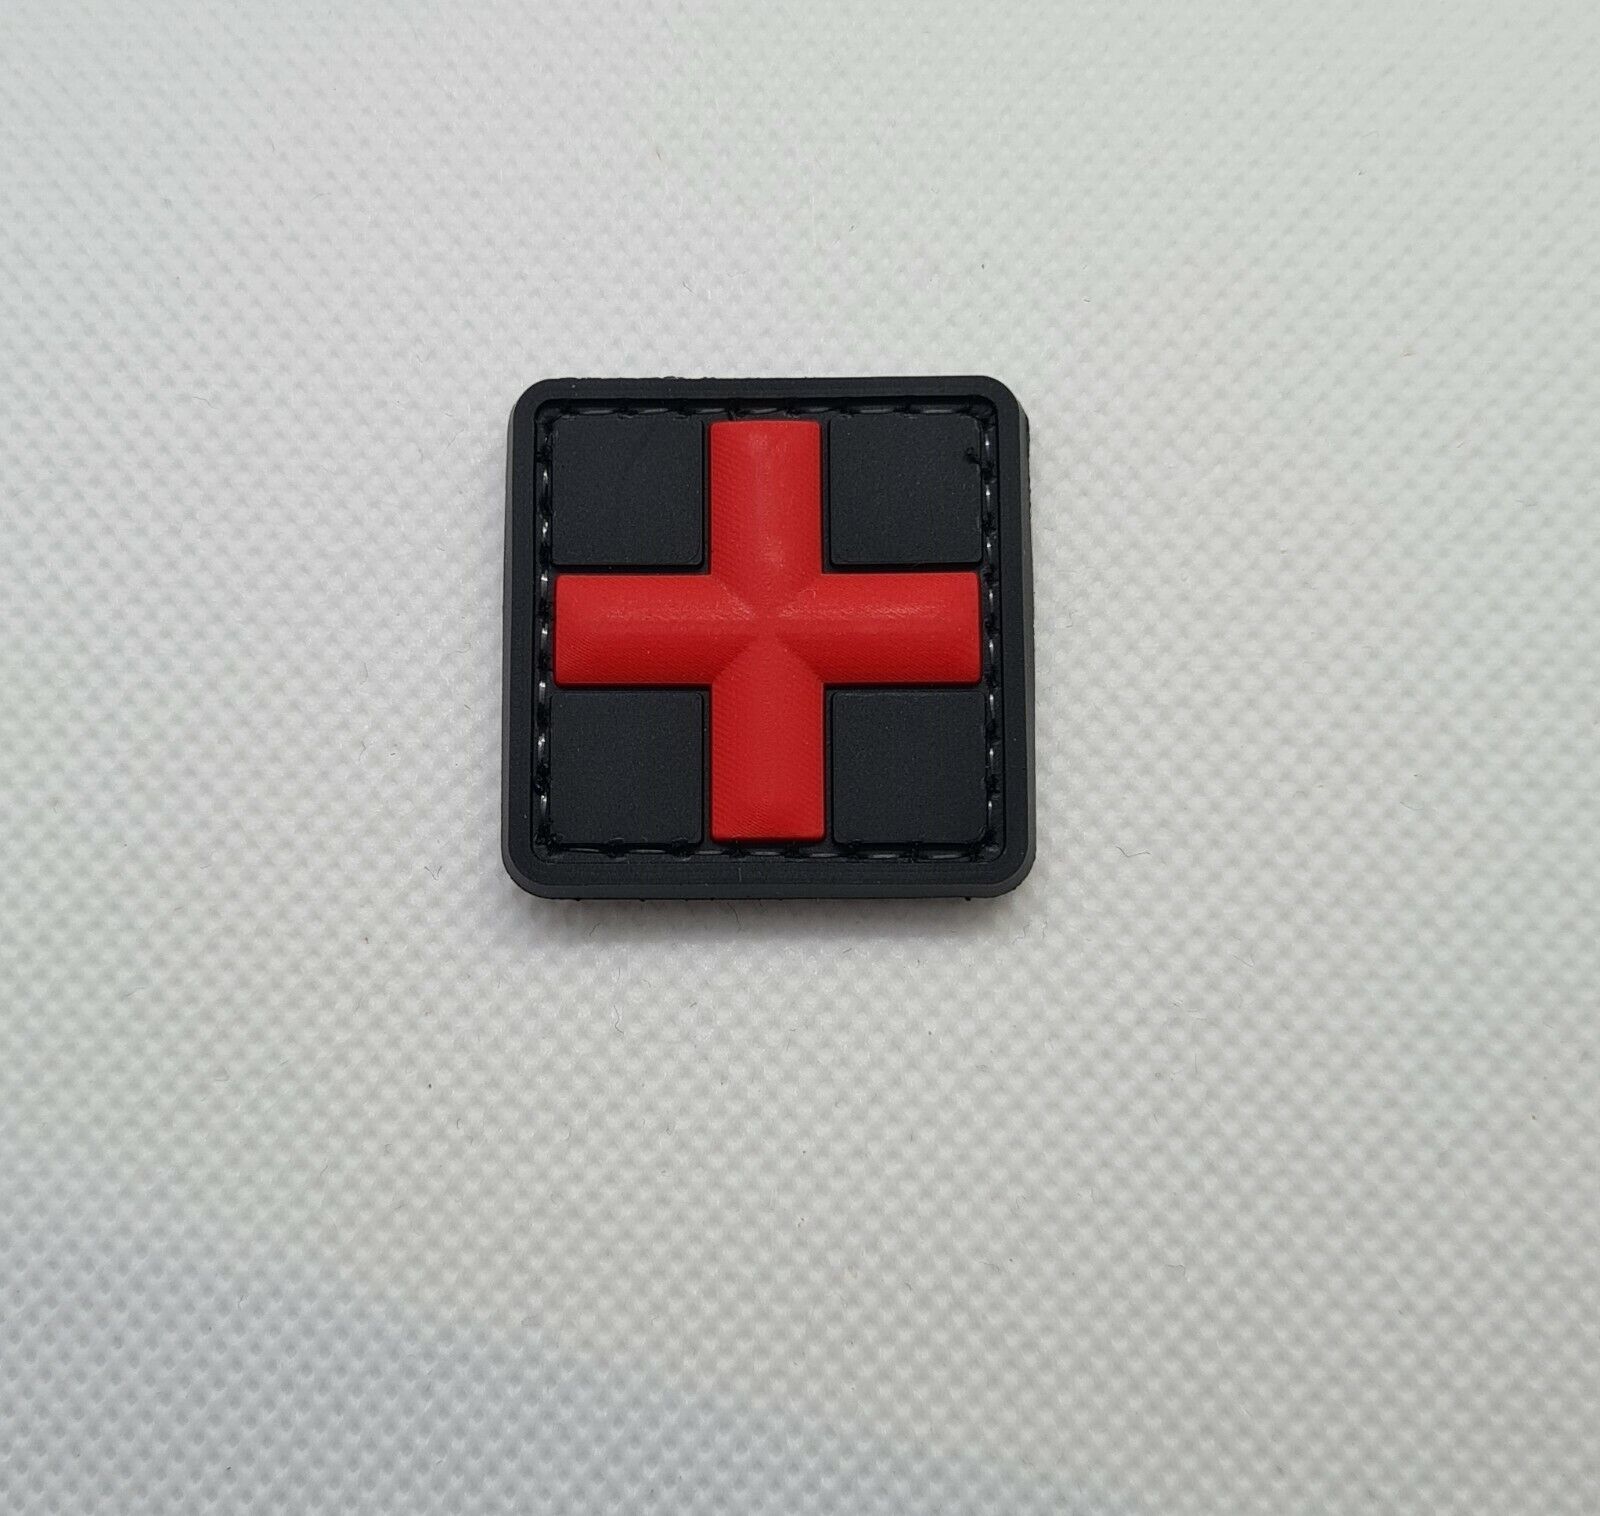 Medic Red Cross 3D PVC Tactical Morale Patch – Hook Backed